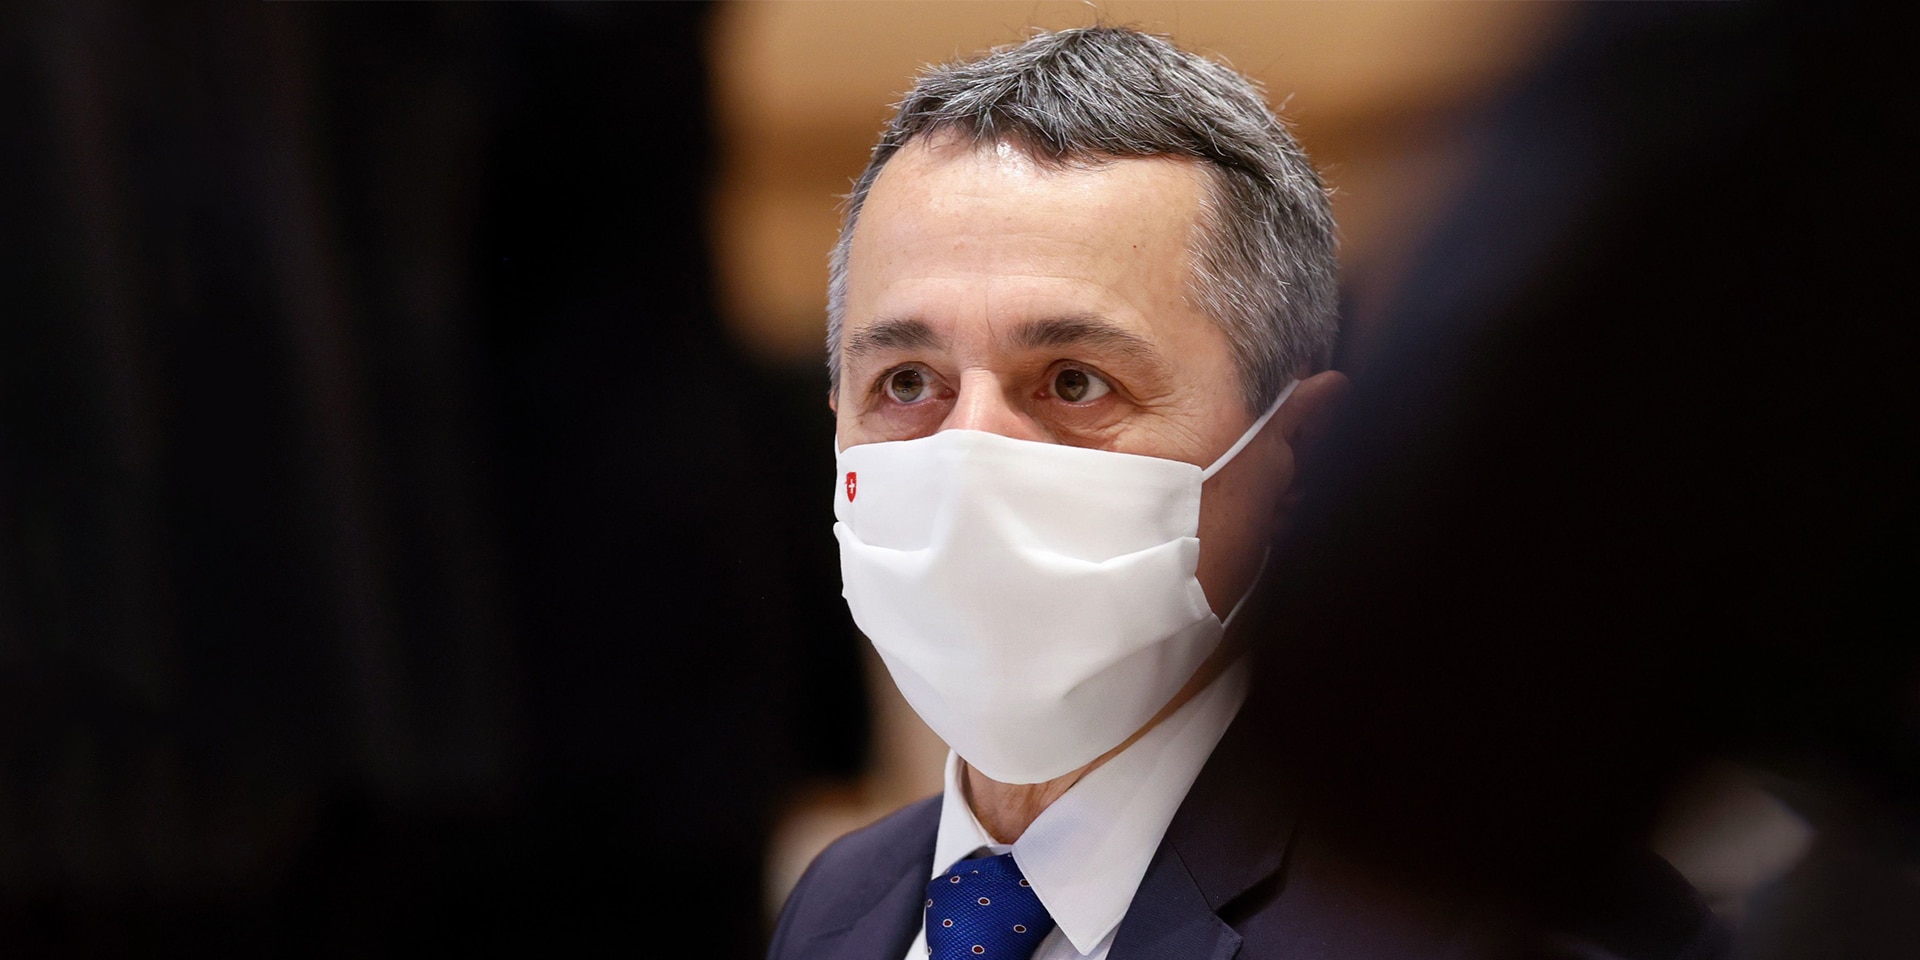  Close-up of Federal Councillor Ignazio Cassis sitting in the room at a UN assembly in November 2020 and wearing a face mask with a Swiss cross.